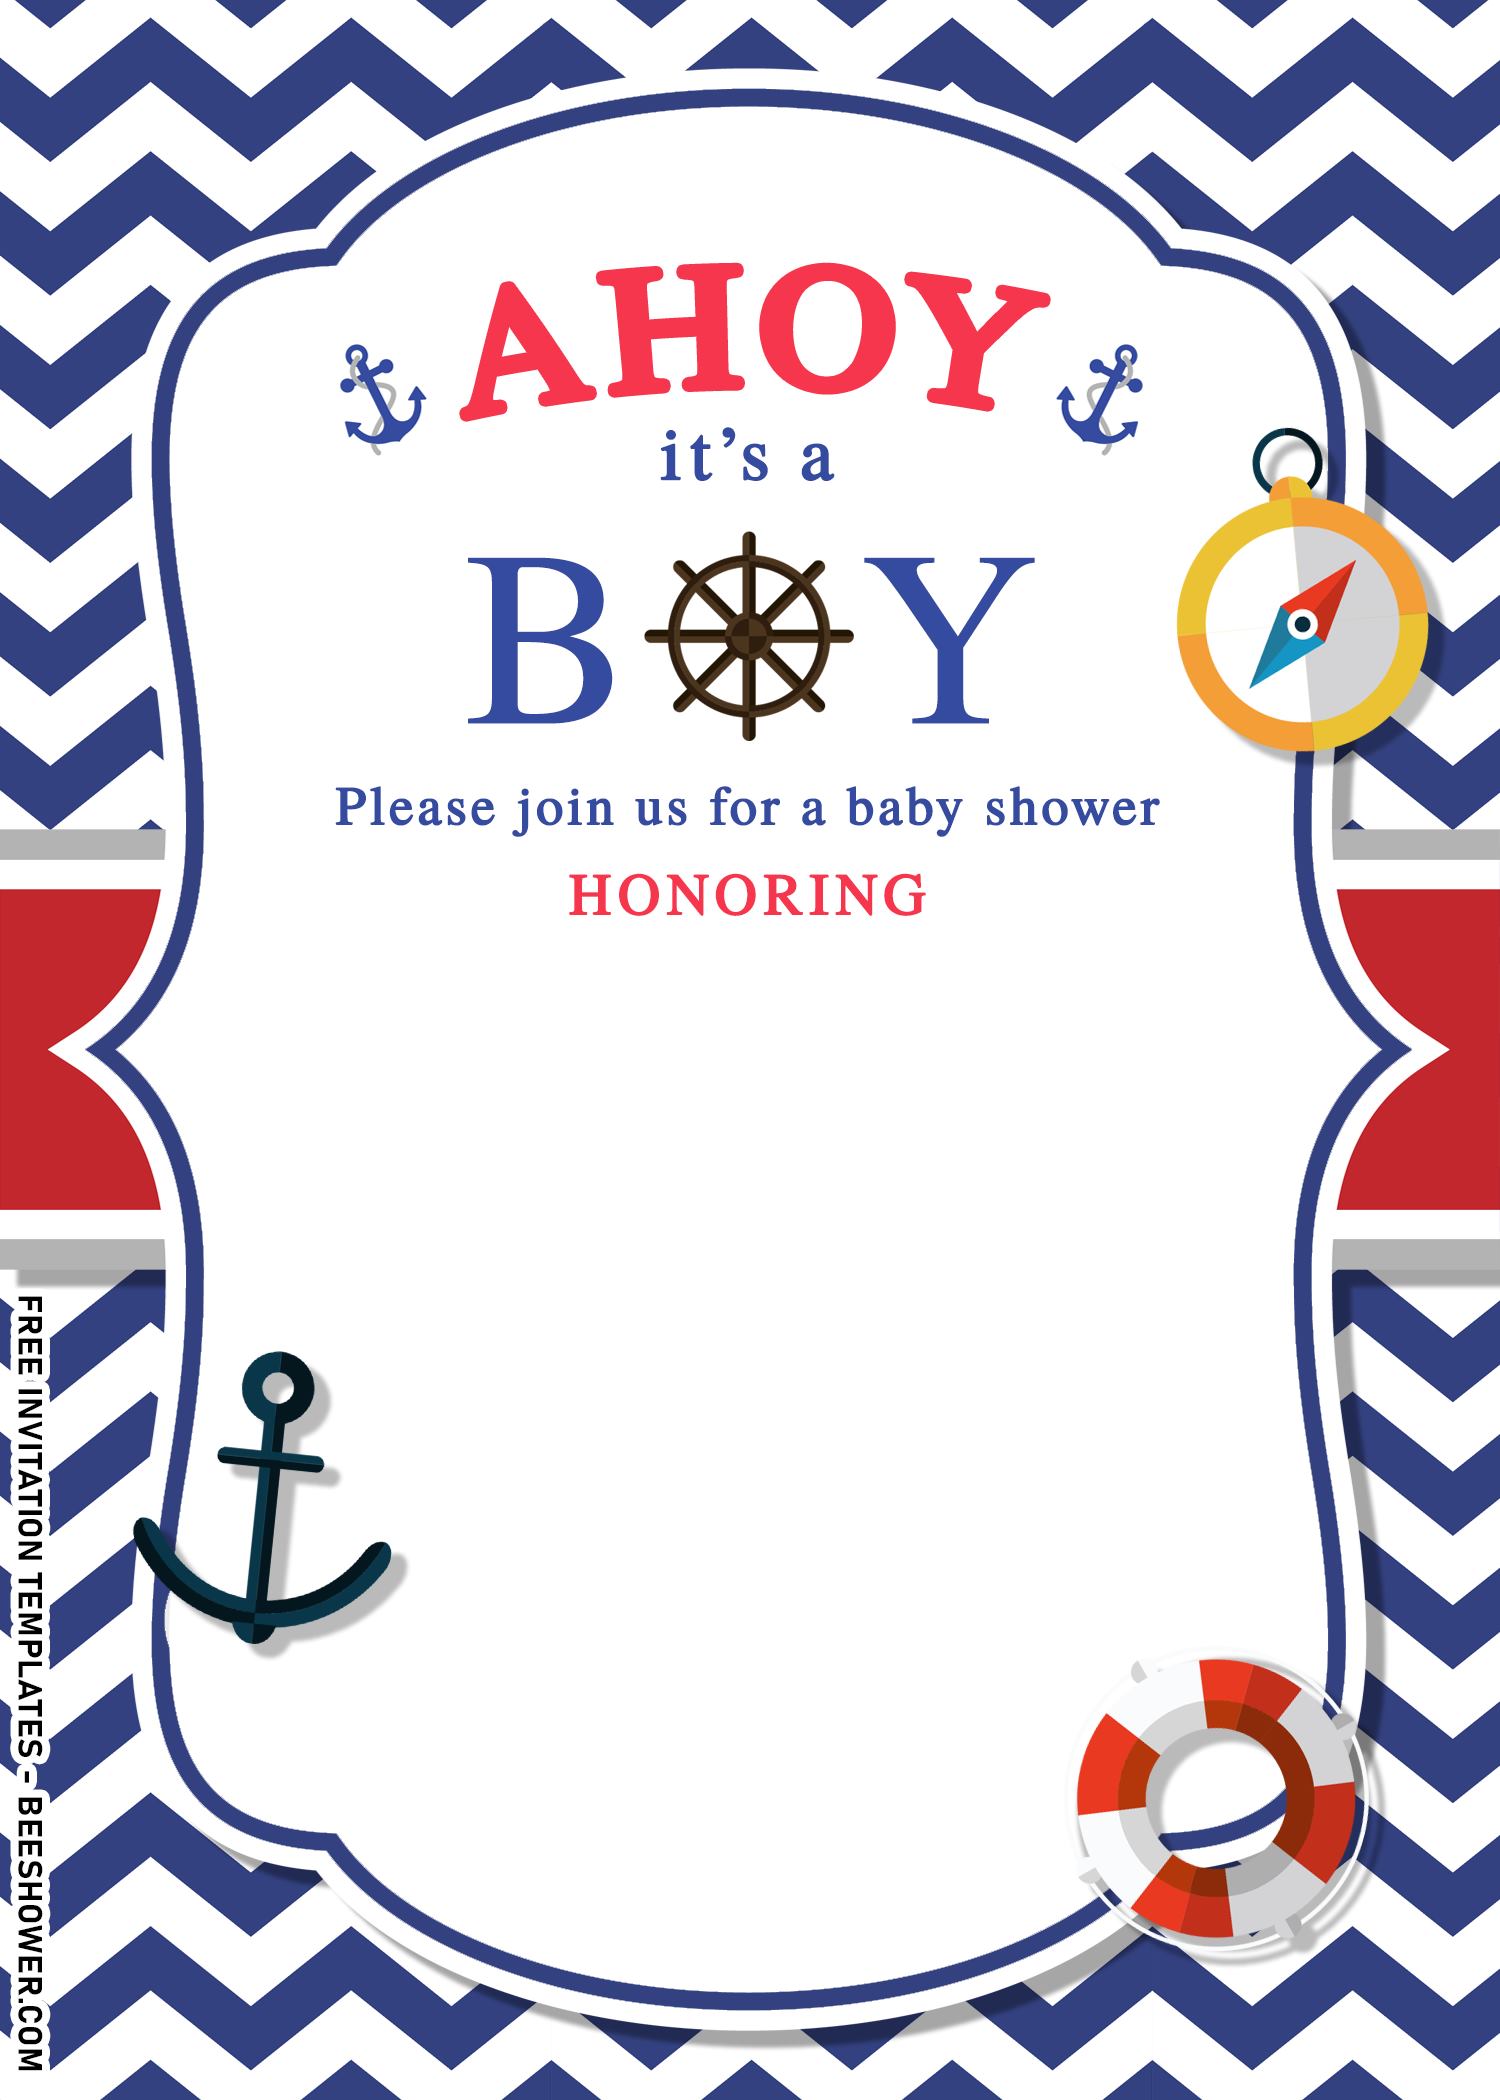 11+ Nautical Themed Birthday Invitation Templates For Your Kid’s Birthday Bash and has gold compass